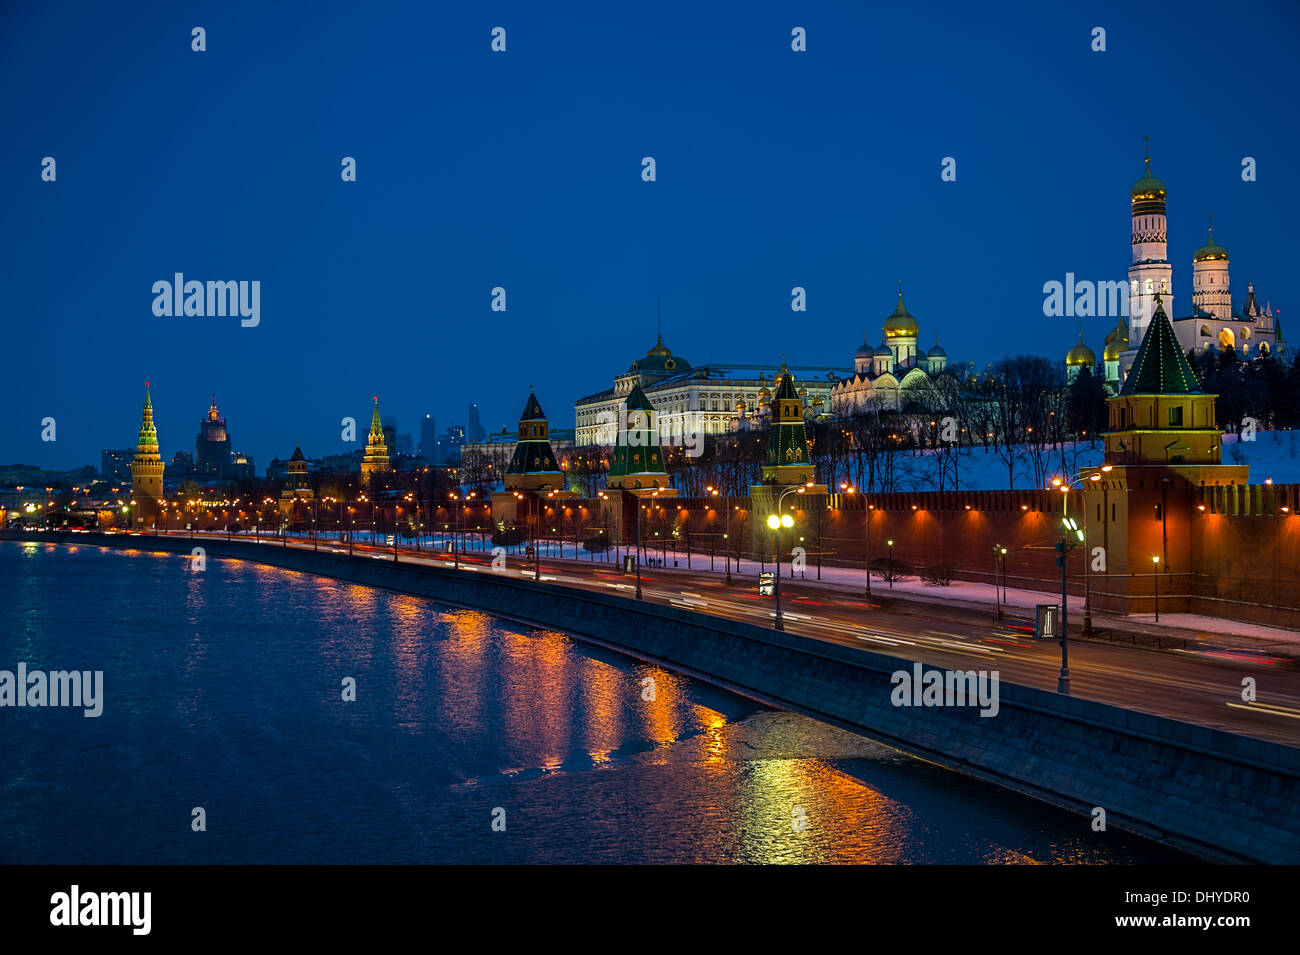 The Kremlin from the banks of the Moskva River in Moscow at night in Russian Federation Stock Photo